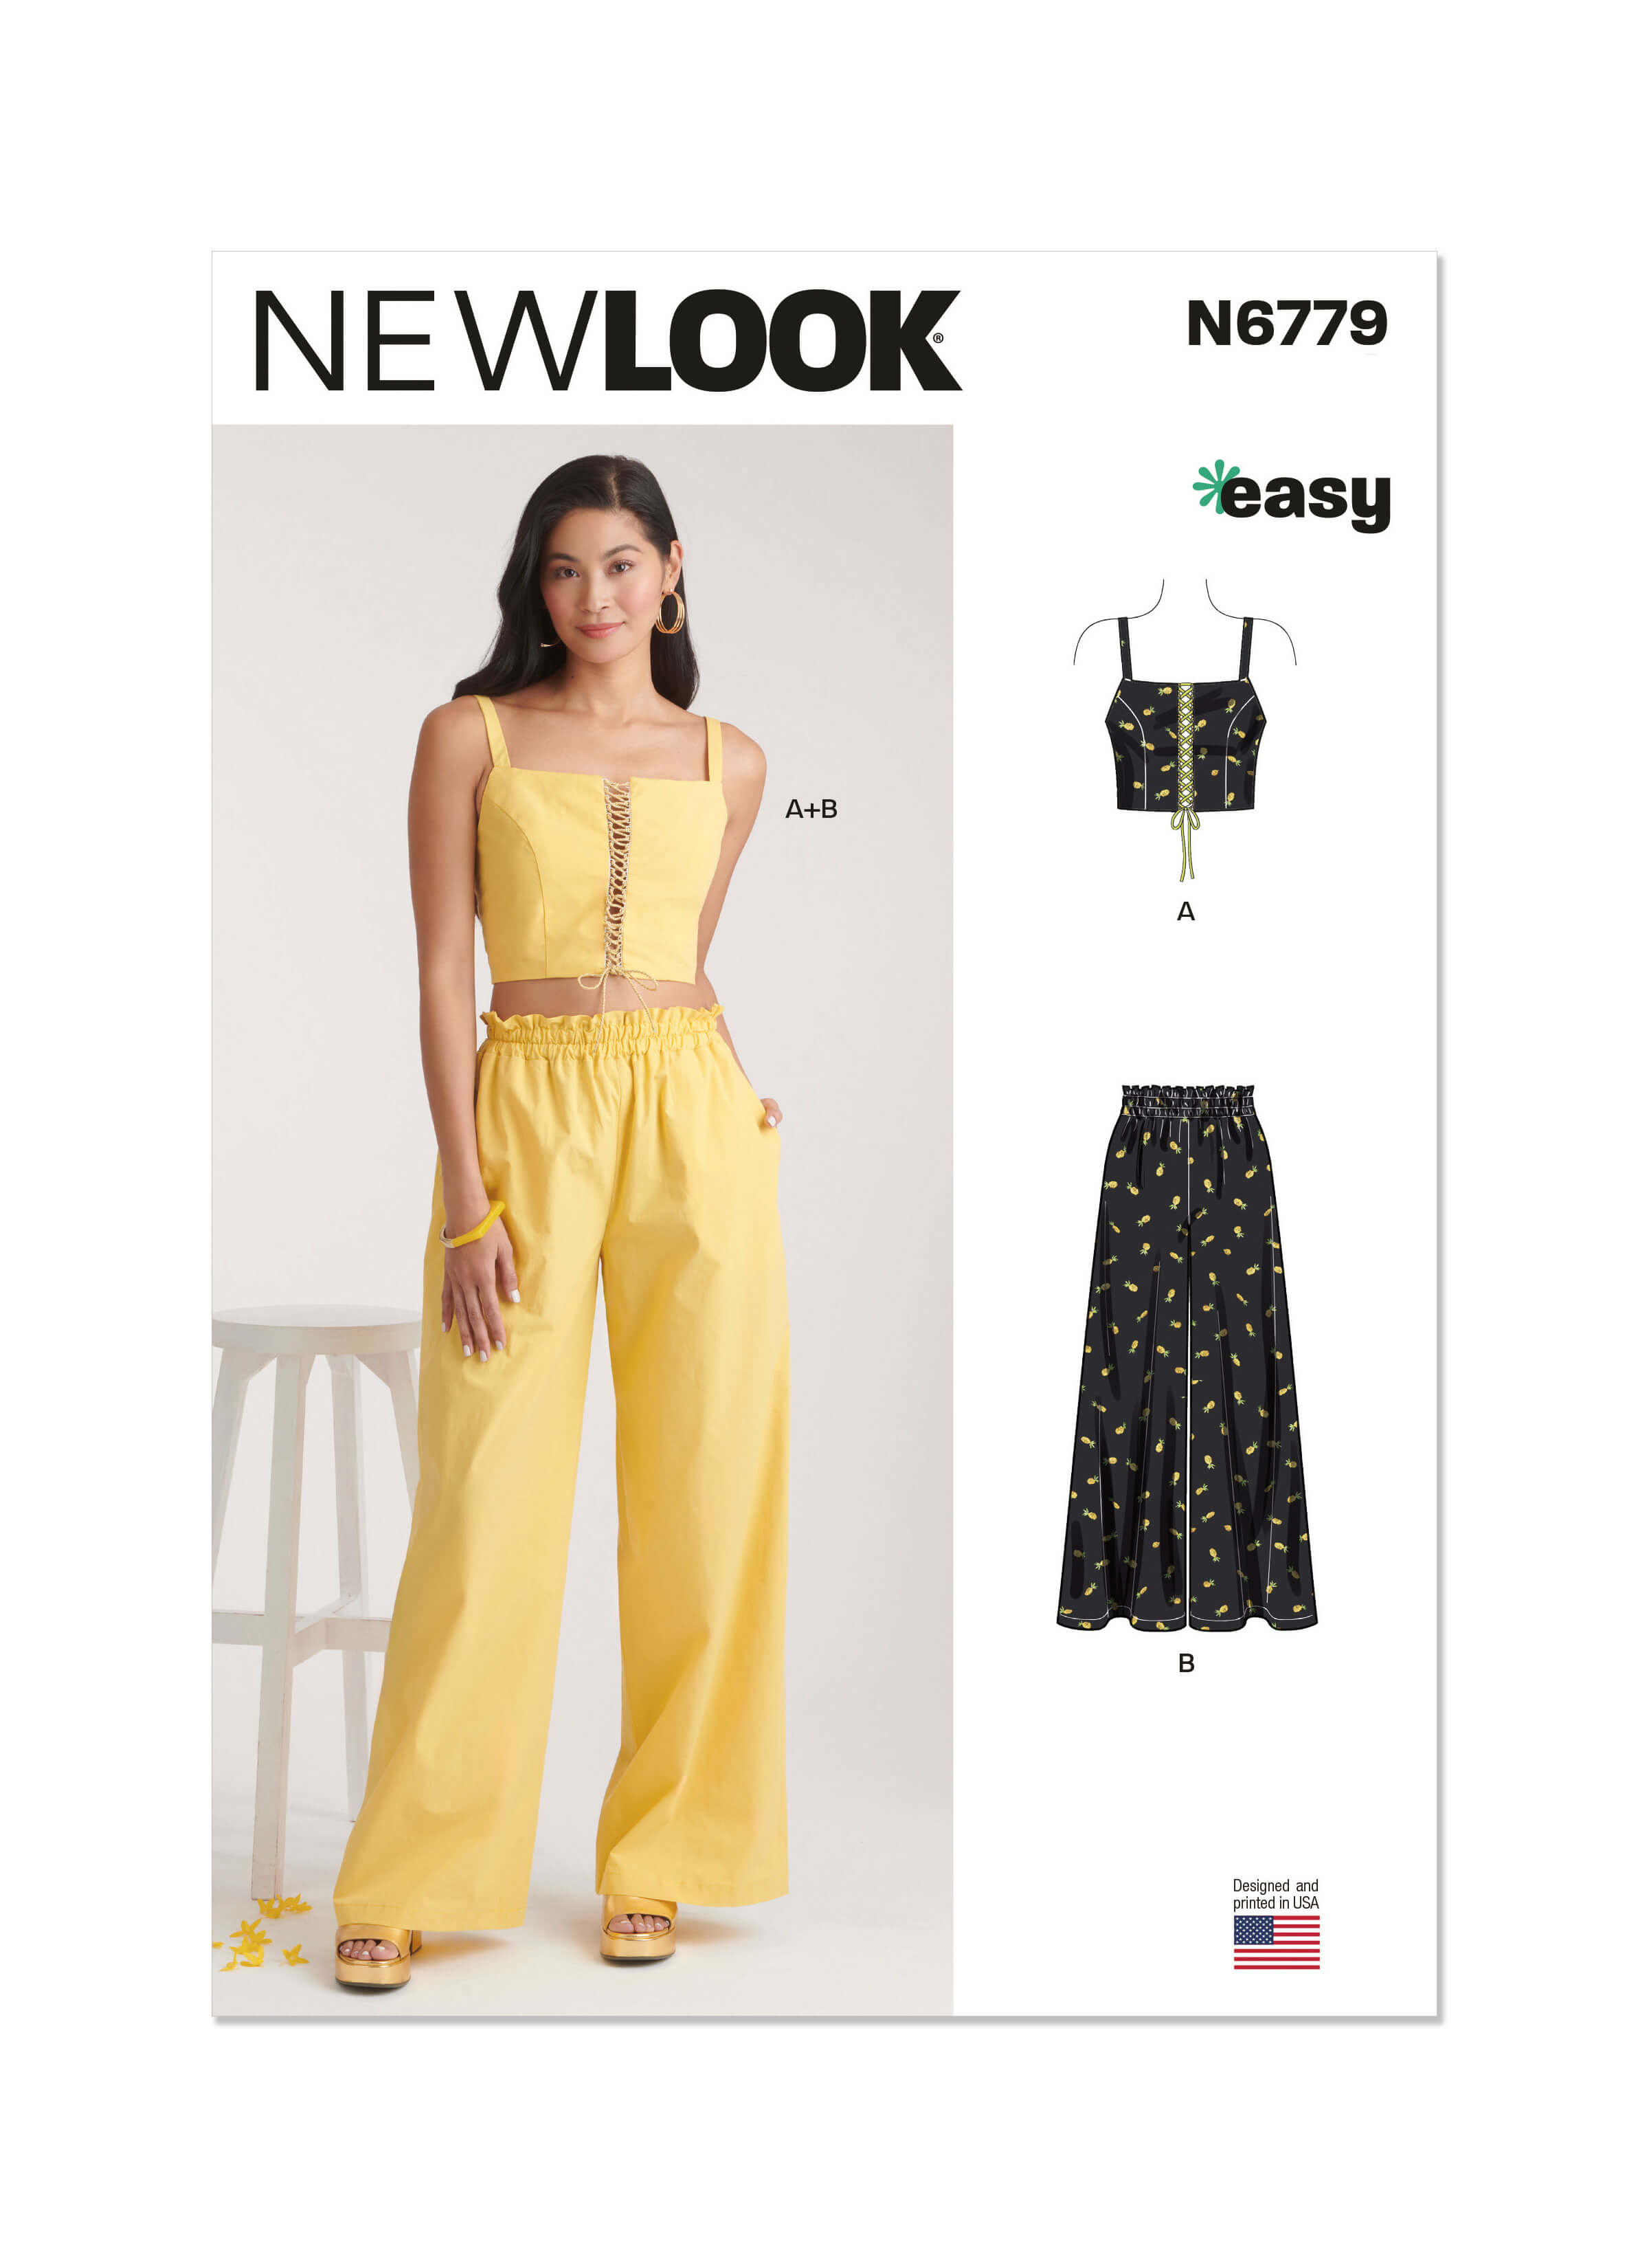 New Look Sewing Pattern N6779 Misses' Bra Top and Trousers